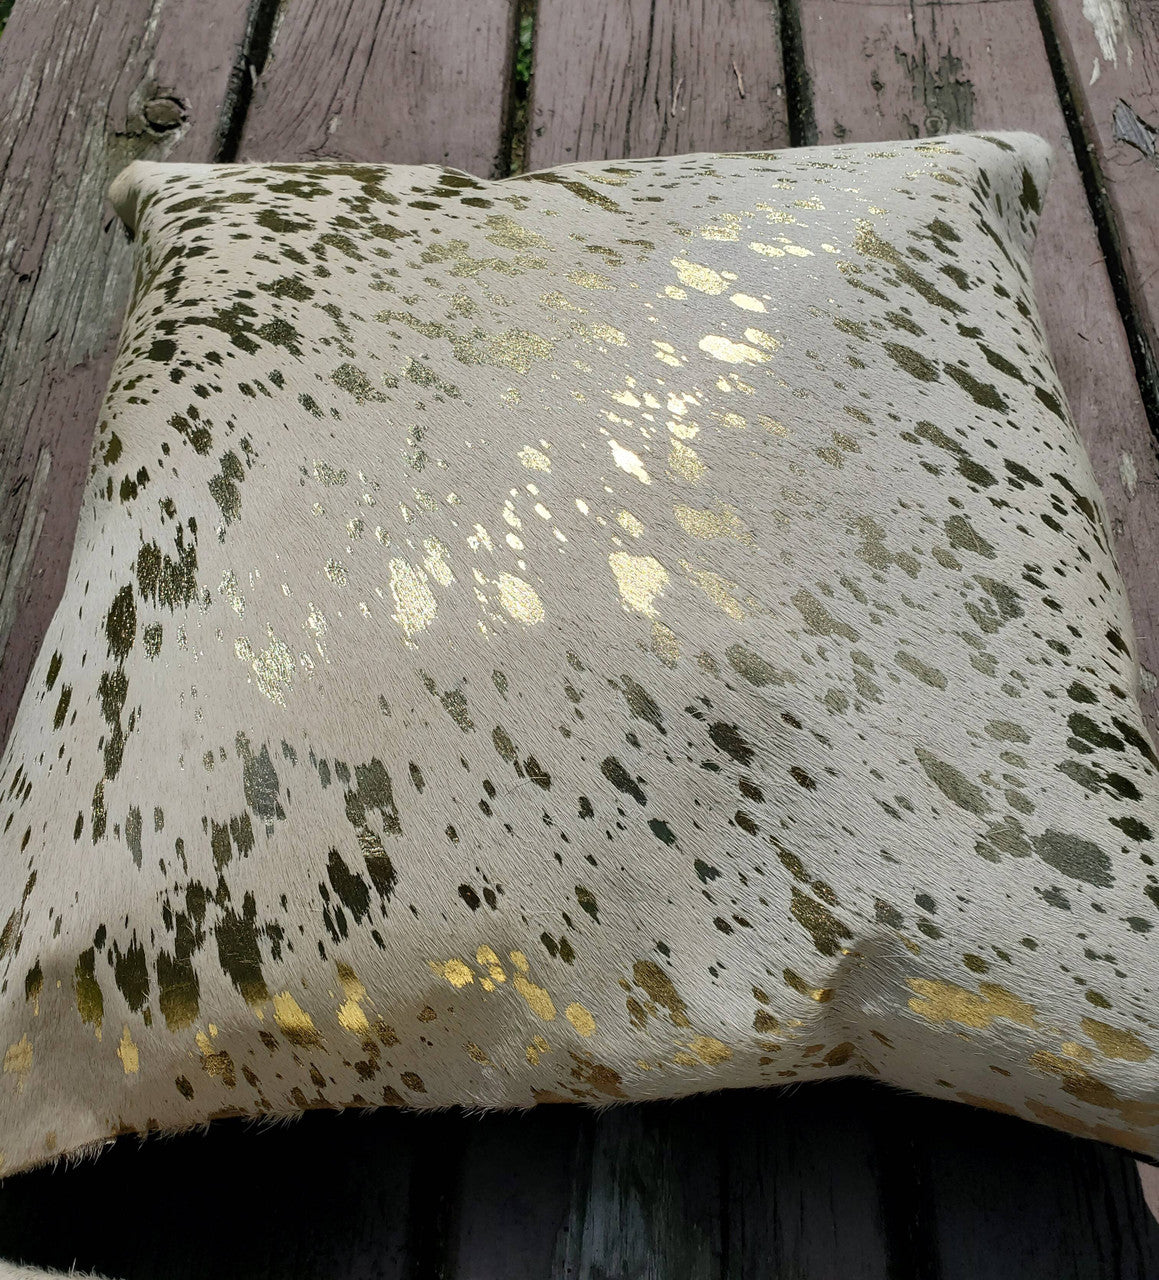 Beautiful cowhide pillows. High quality gold metallic brings the invite and intrigue to any space.

